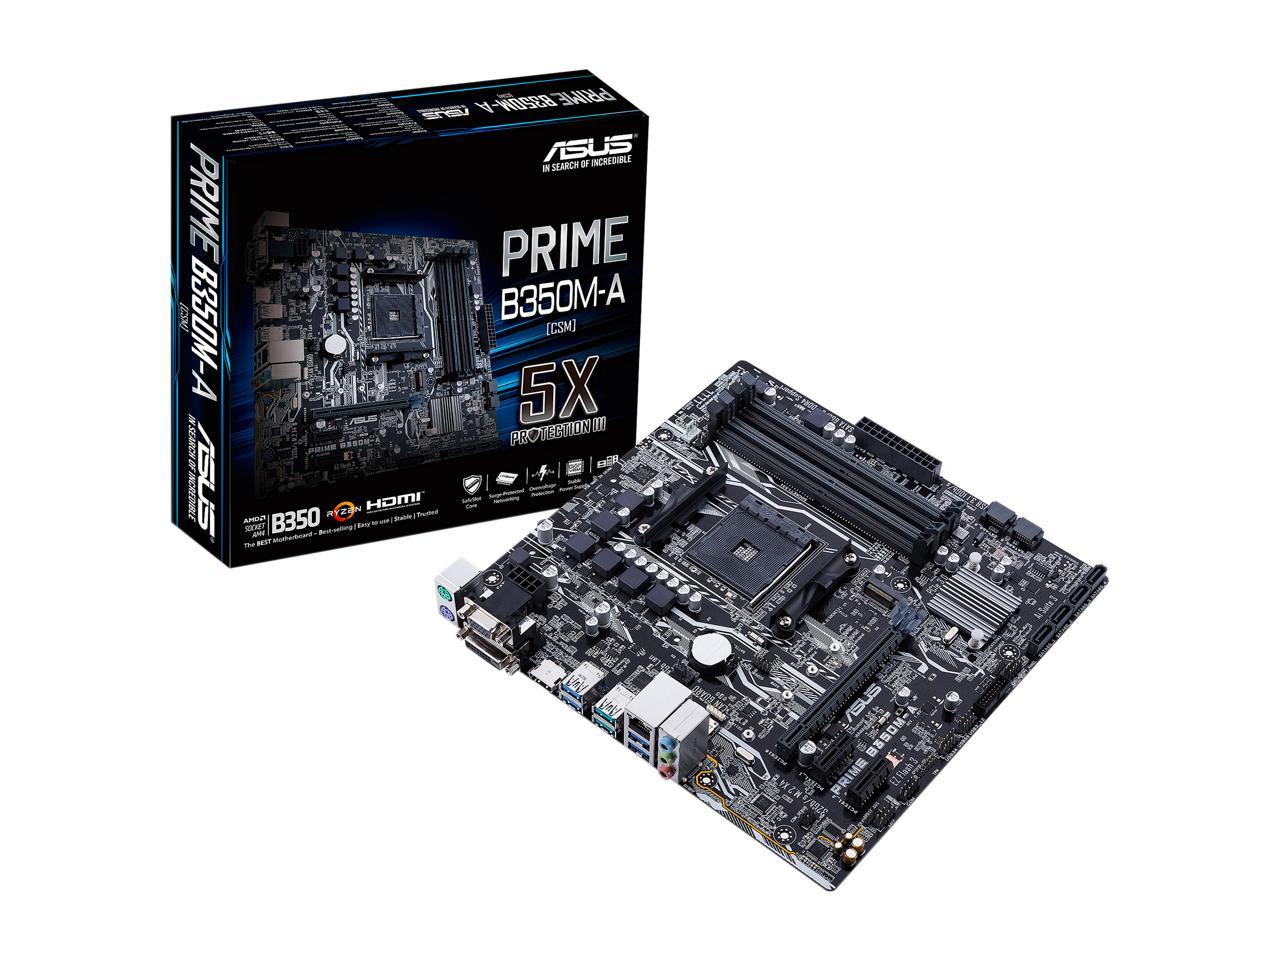 ASUS Prime B350M-A/CSM AM4 AMD B350 SATA 6Gb/s USB 3.1 HDMI Micro ATX  Motherboards - AMD